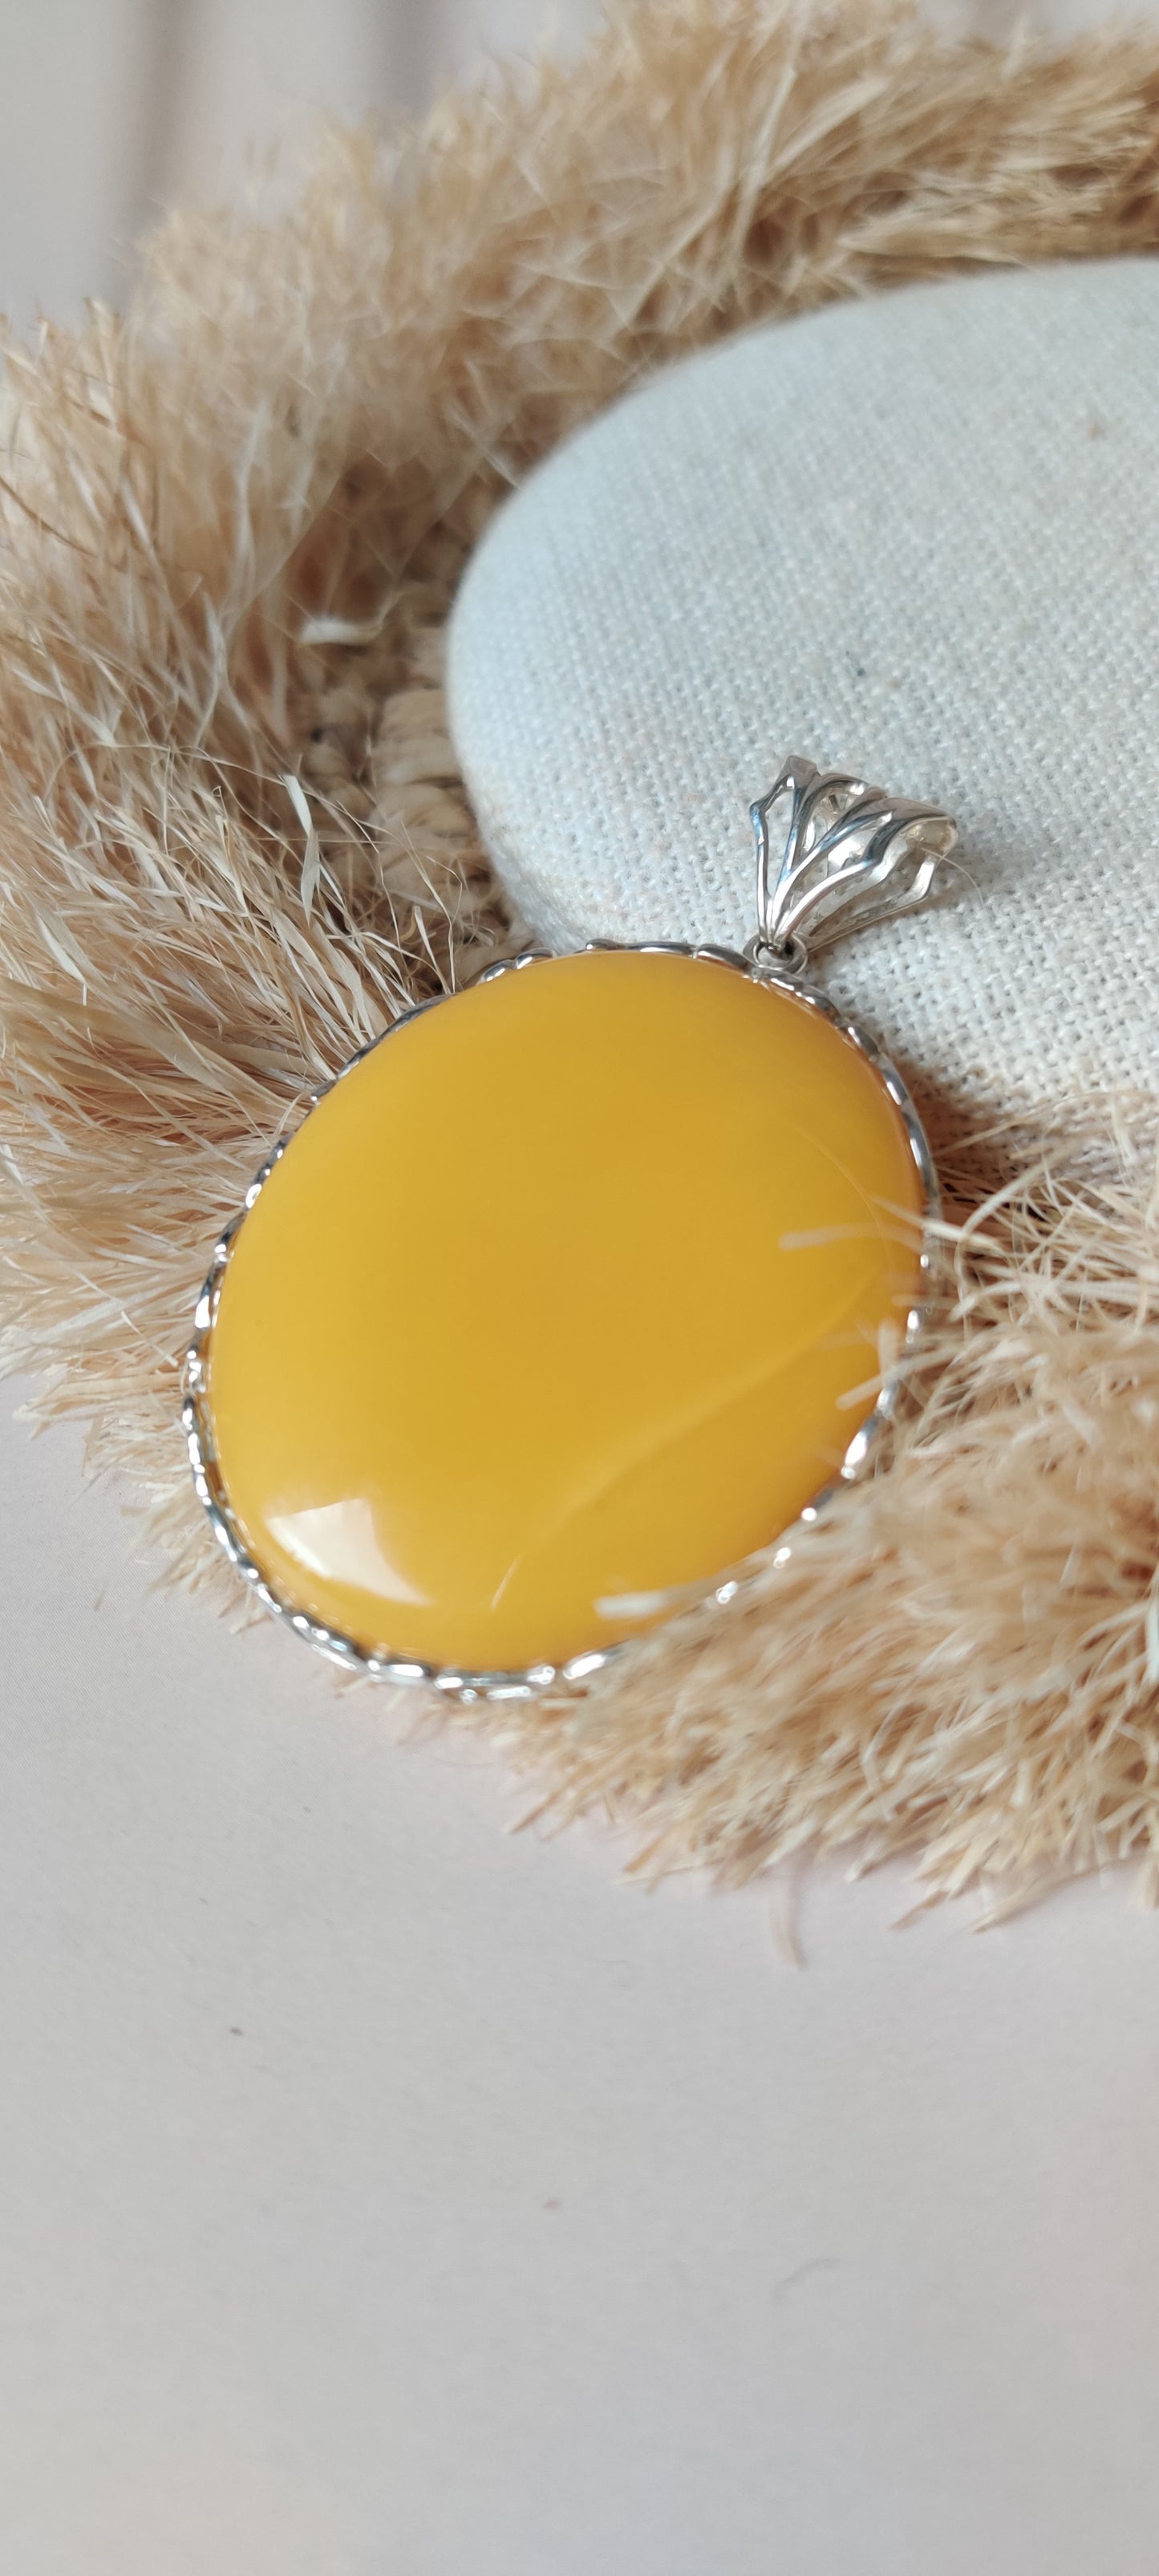 Round Natural Butterscotch Amber Pendant in Silver